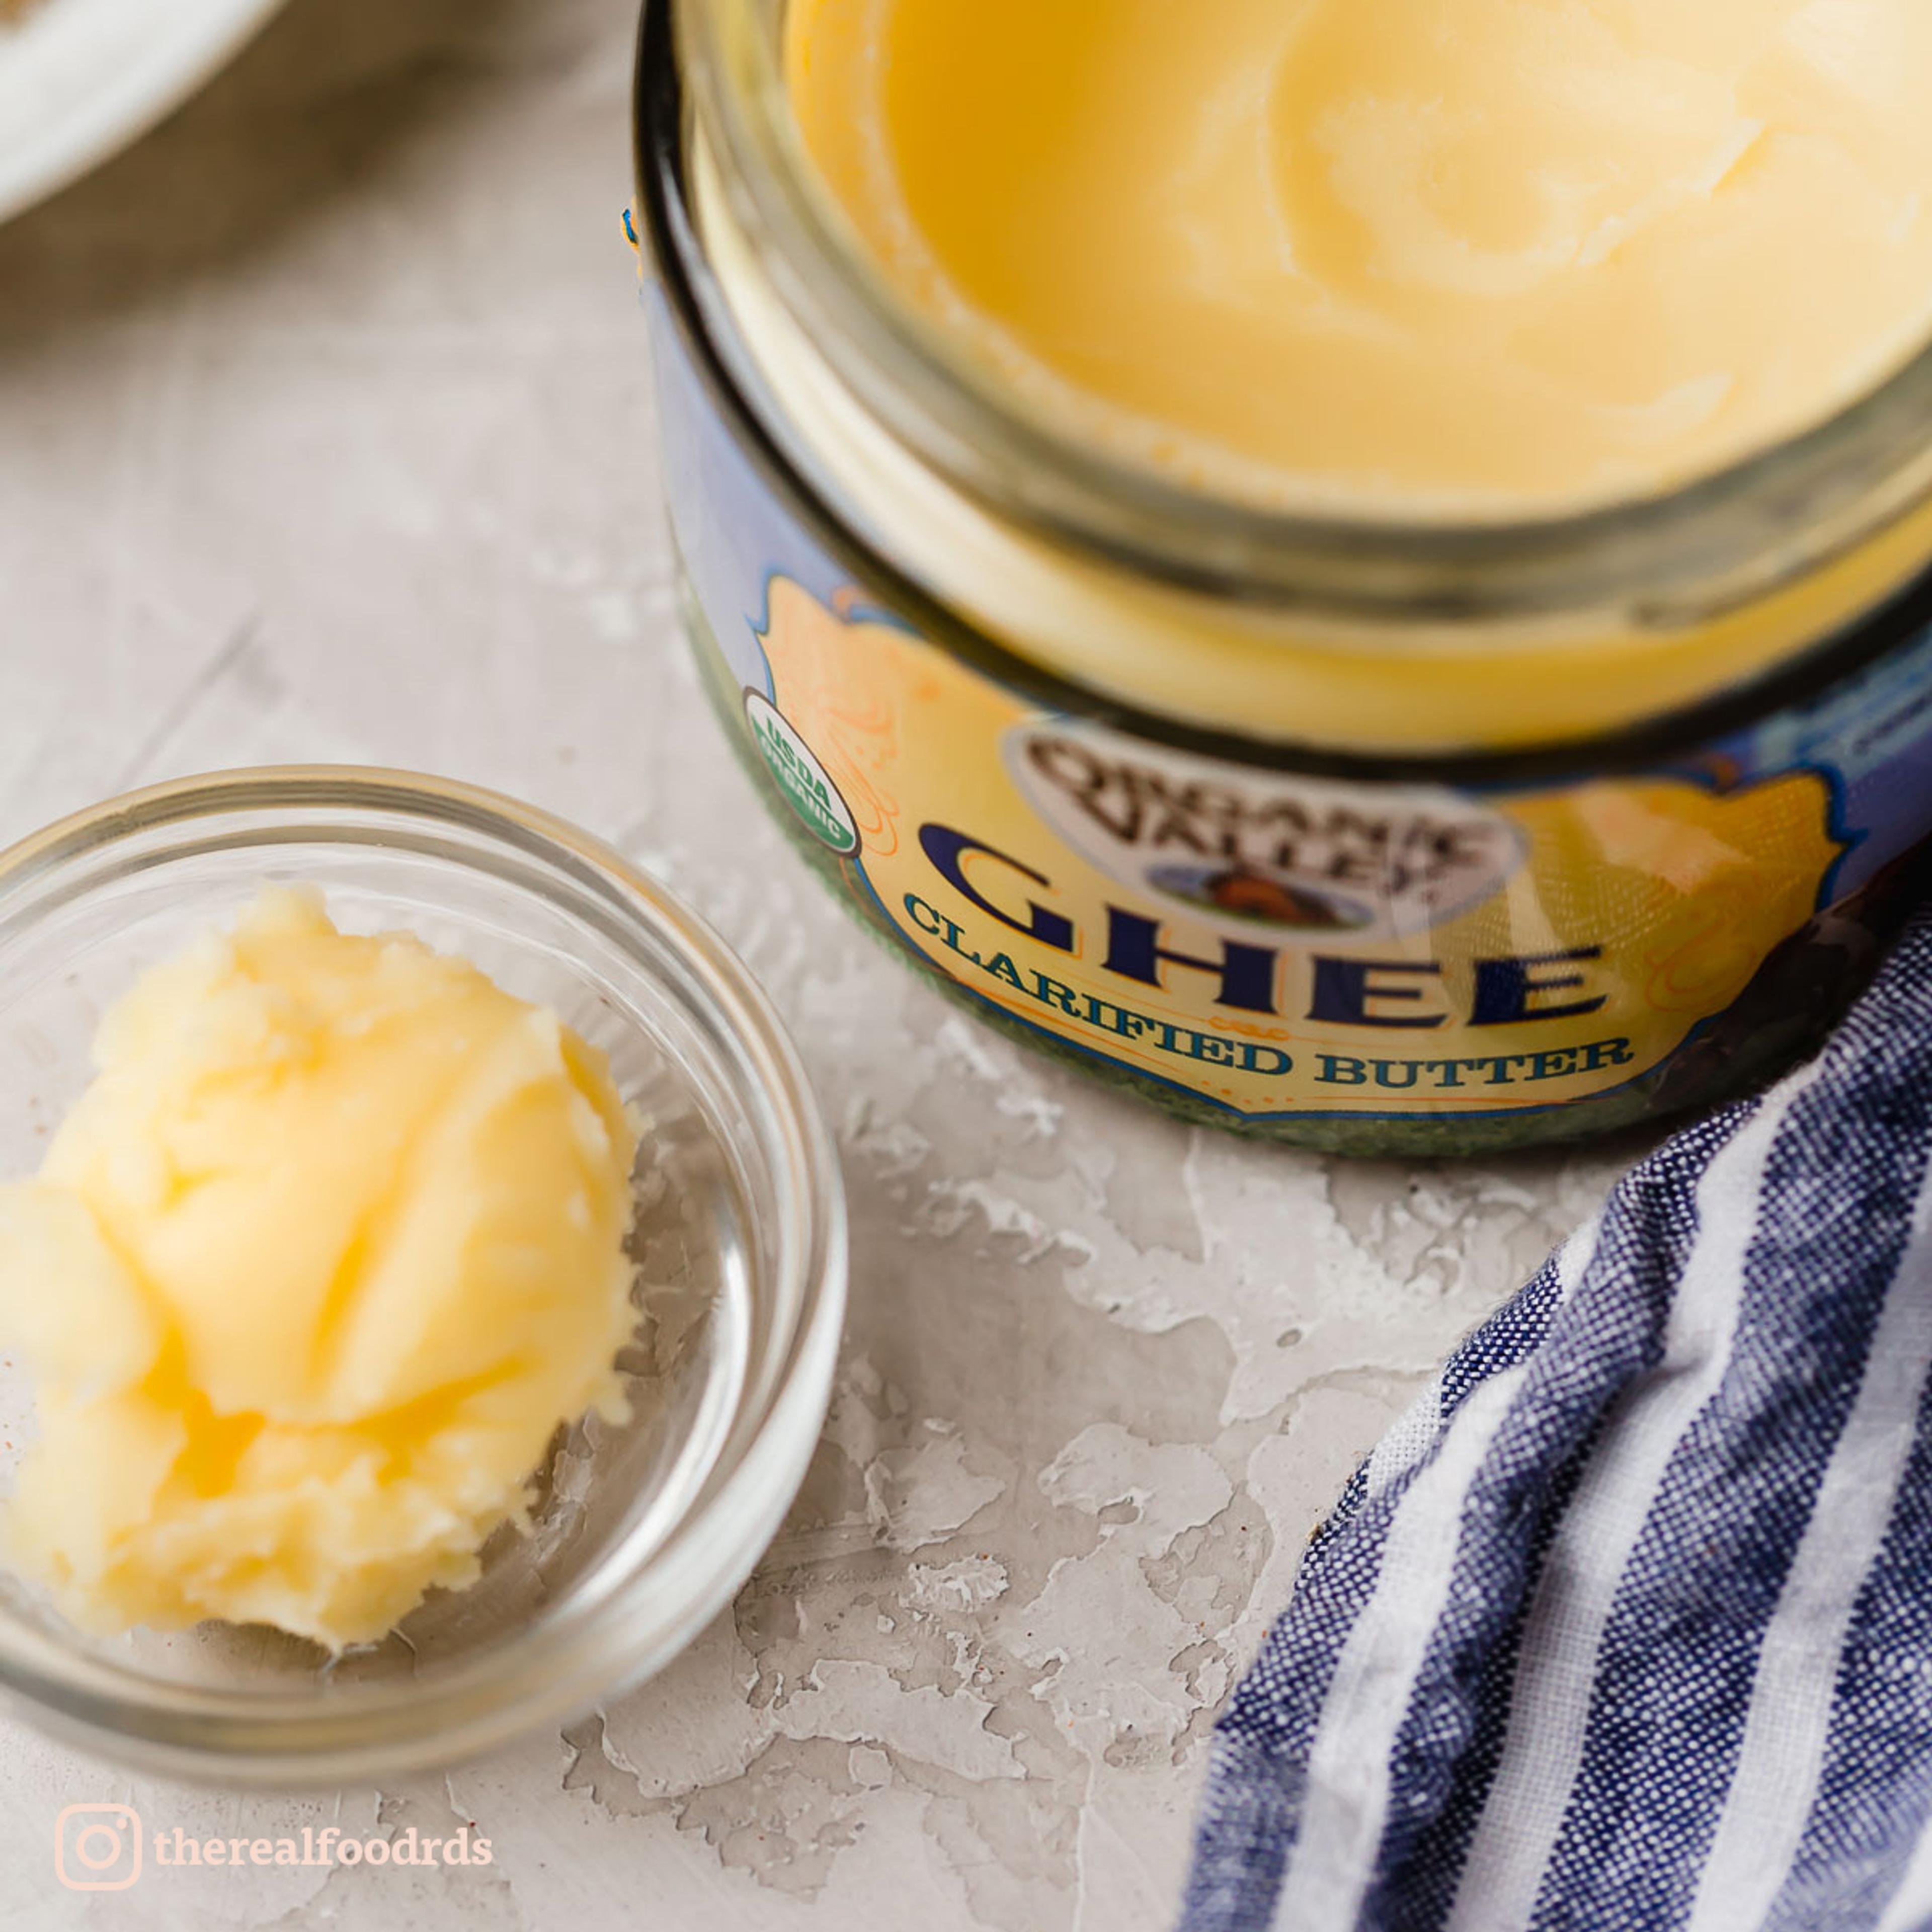 Ramekin dish with a scoop of Organic Valley Ghee. Photo by The Real Food Dietitians.